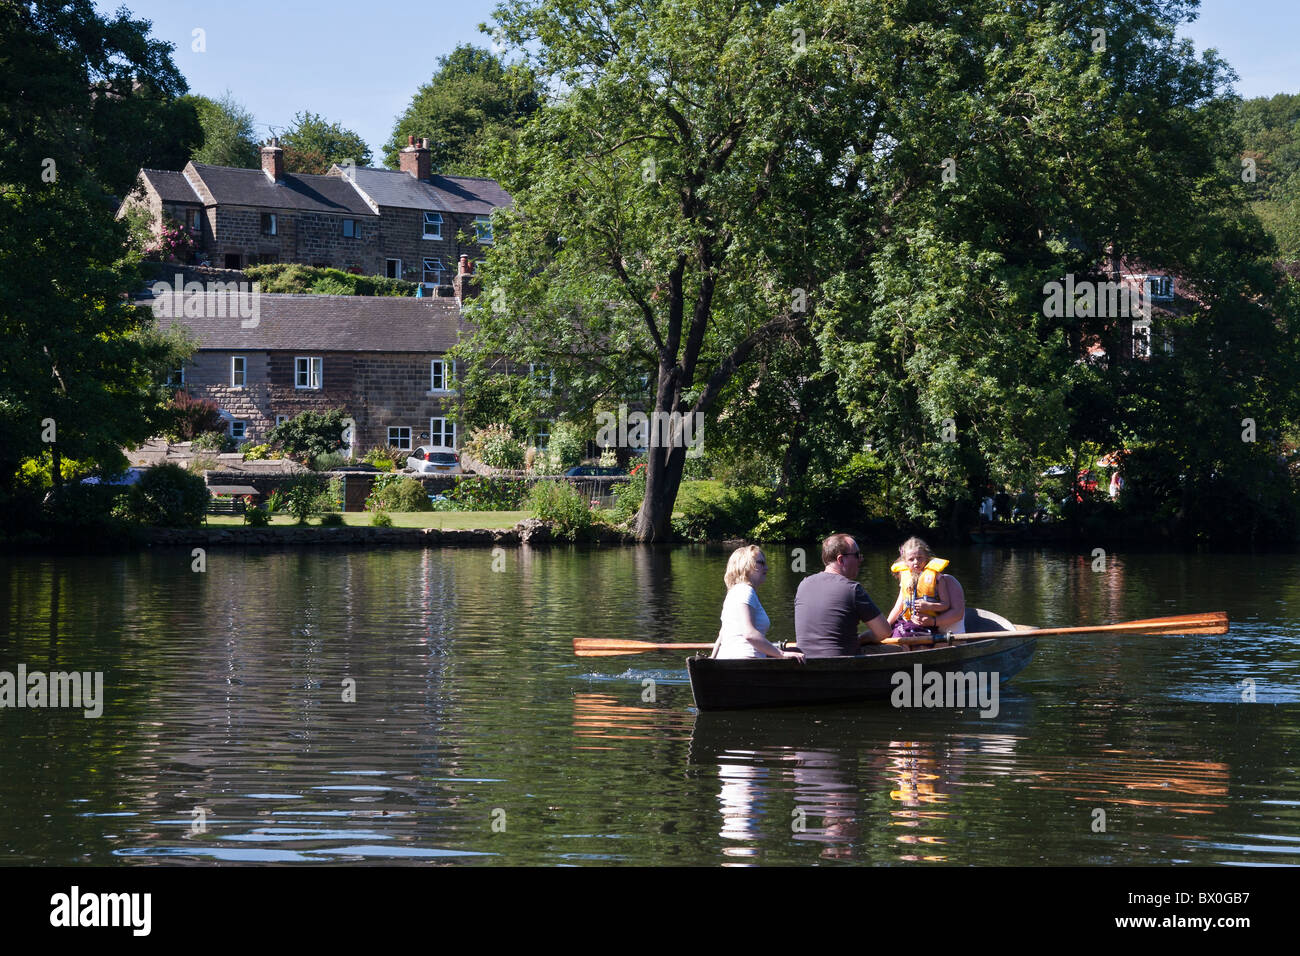 Family rowing on the River Derwent at the River Gardens, Belper, Derbyshire, England Stock Photo